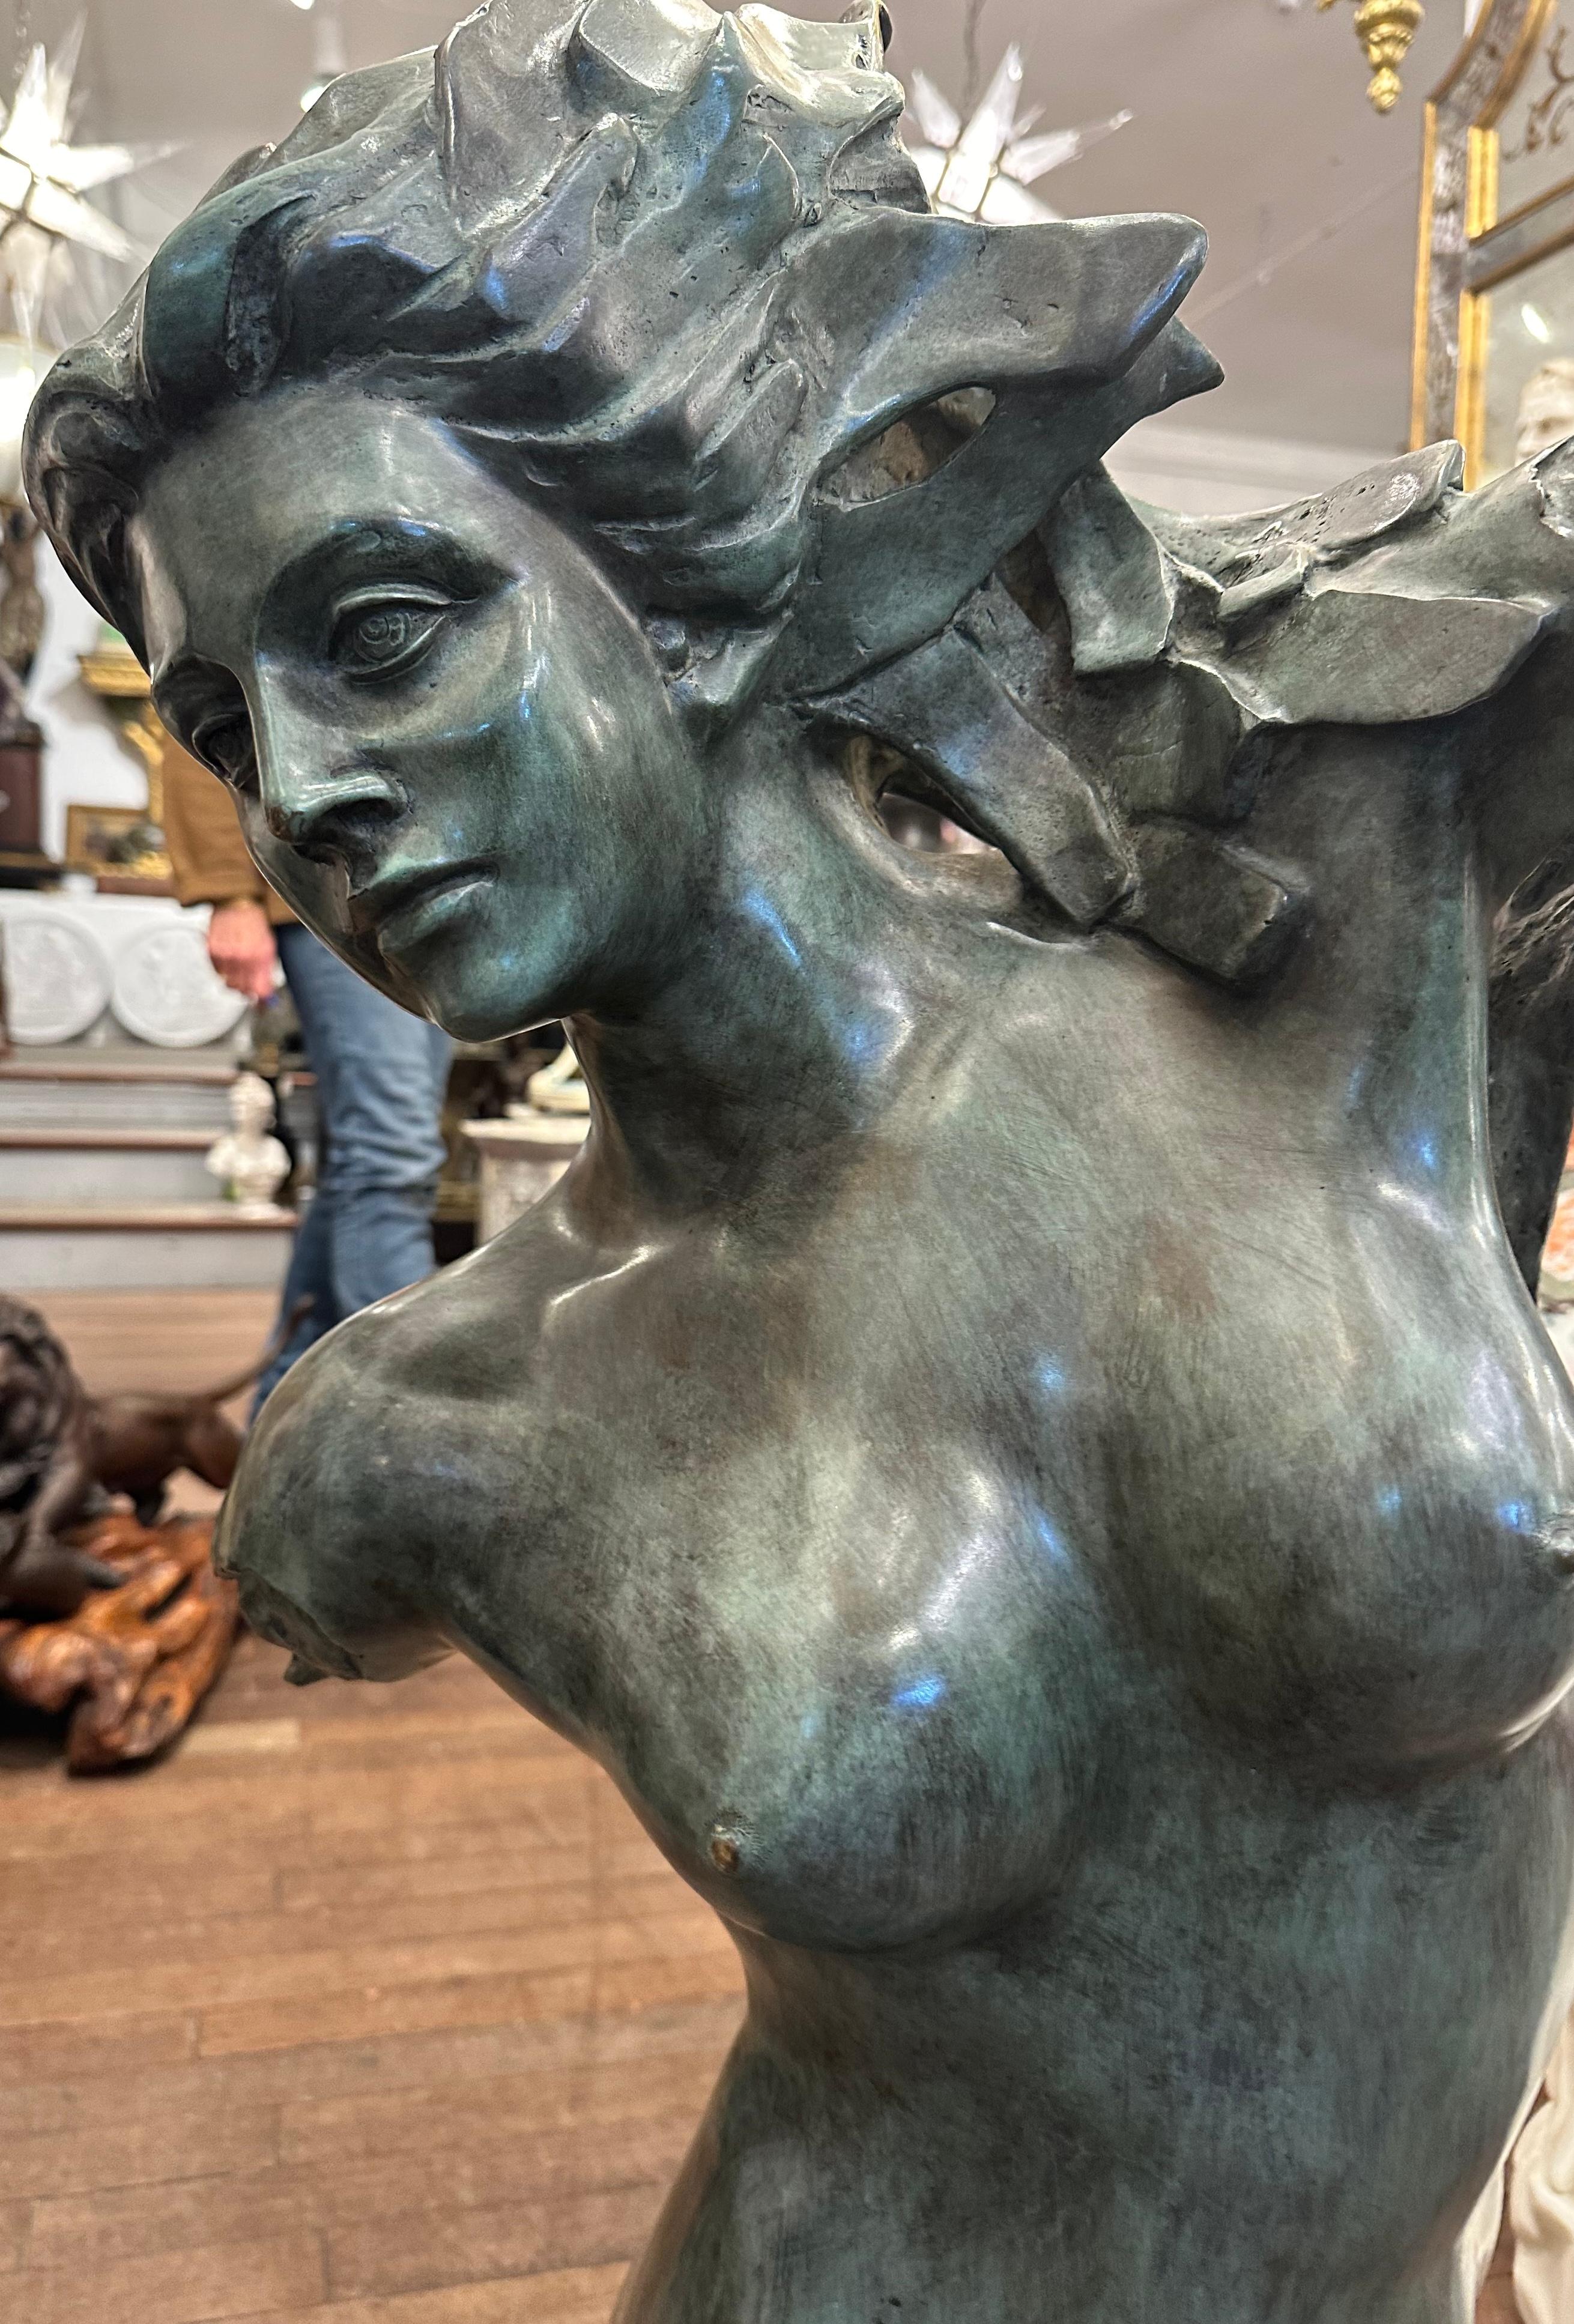 A highly decorative bronze casting of a female on a  solid black marble base. Beautifully detailed features and bronze colouration. This is a striking piece that would look delightful in any room.